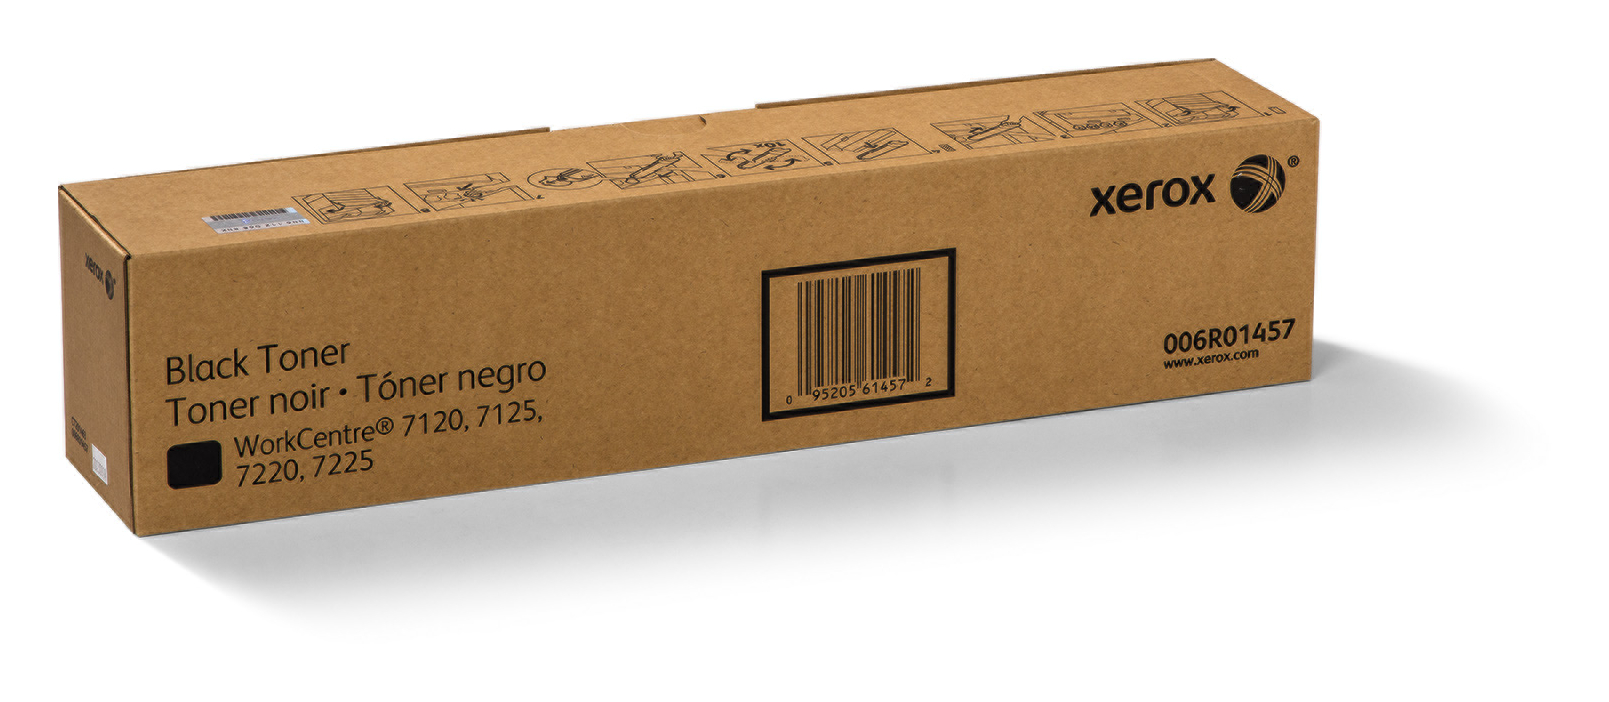 WorkCentre 7220/7225 Black Toner Cartridge (22,000 Pages) 006R01457 Genuine  Xerox Supplies